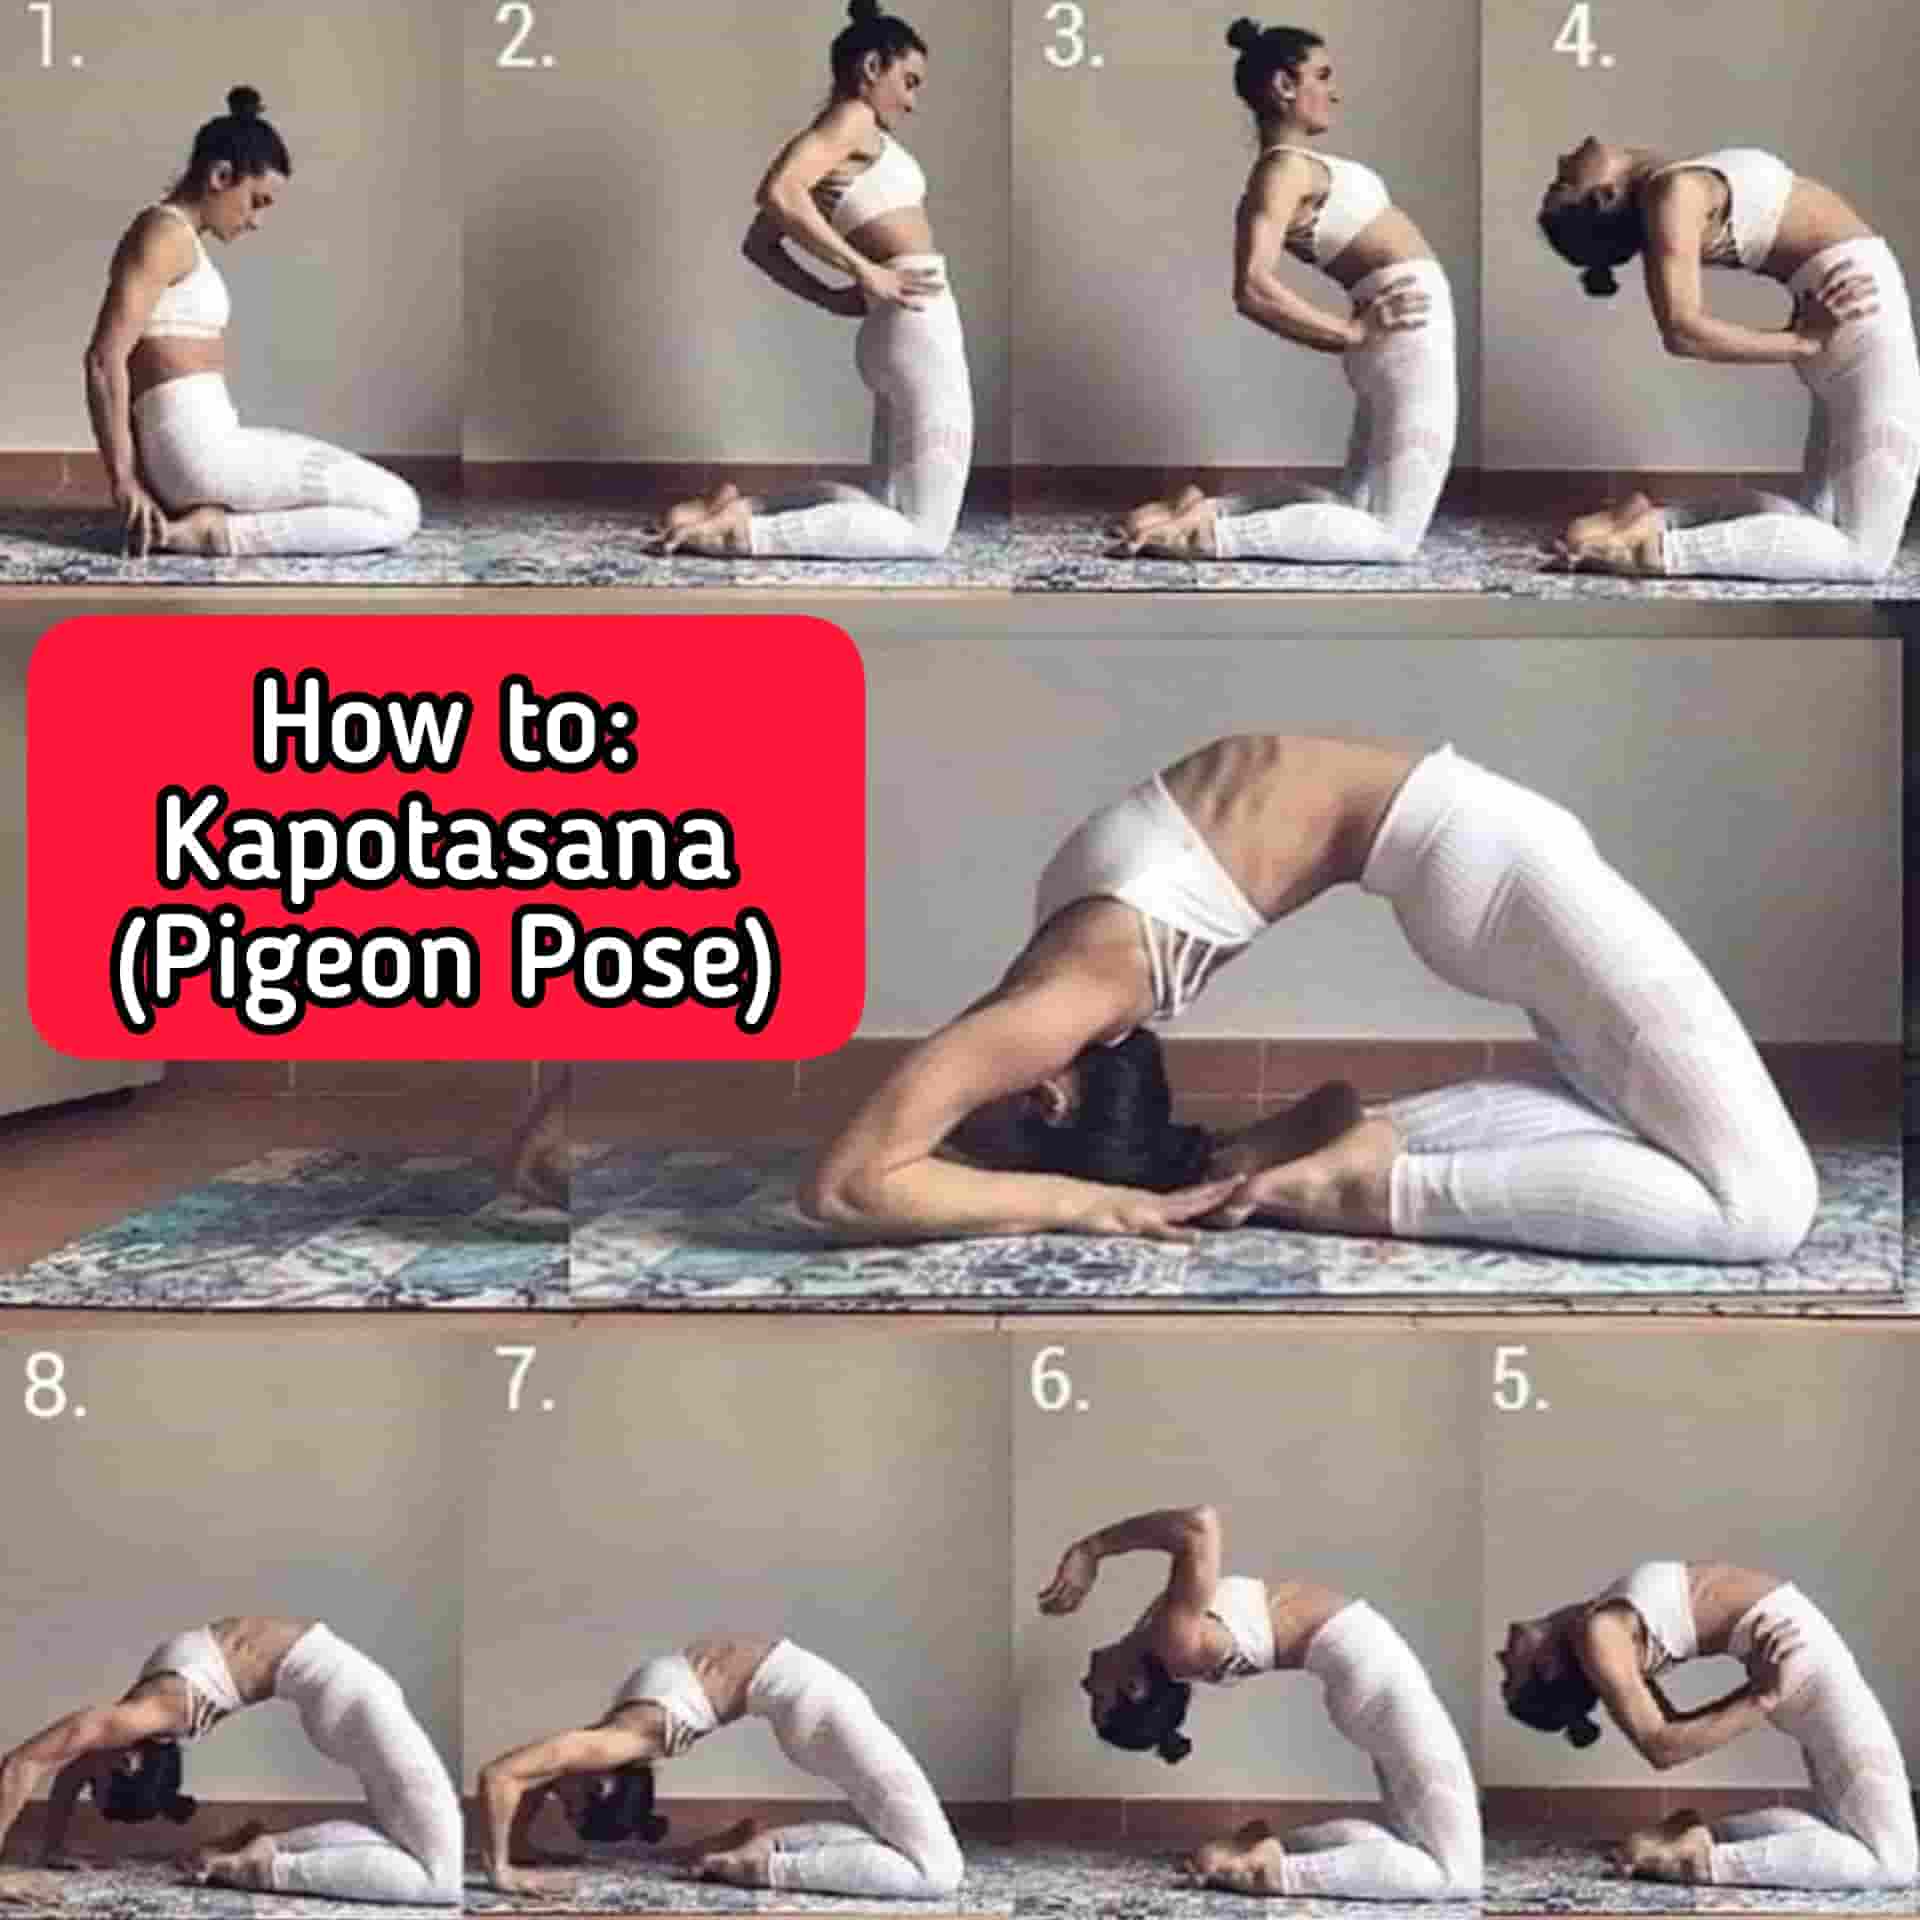 How To Do Pigeon Pose Without Pain  YouTube